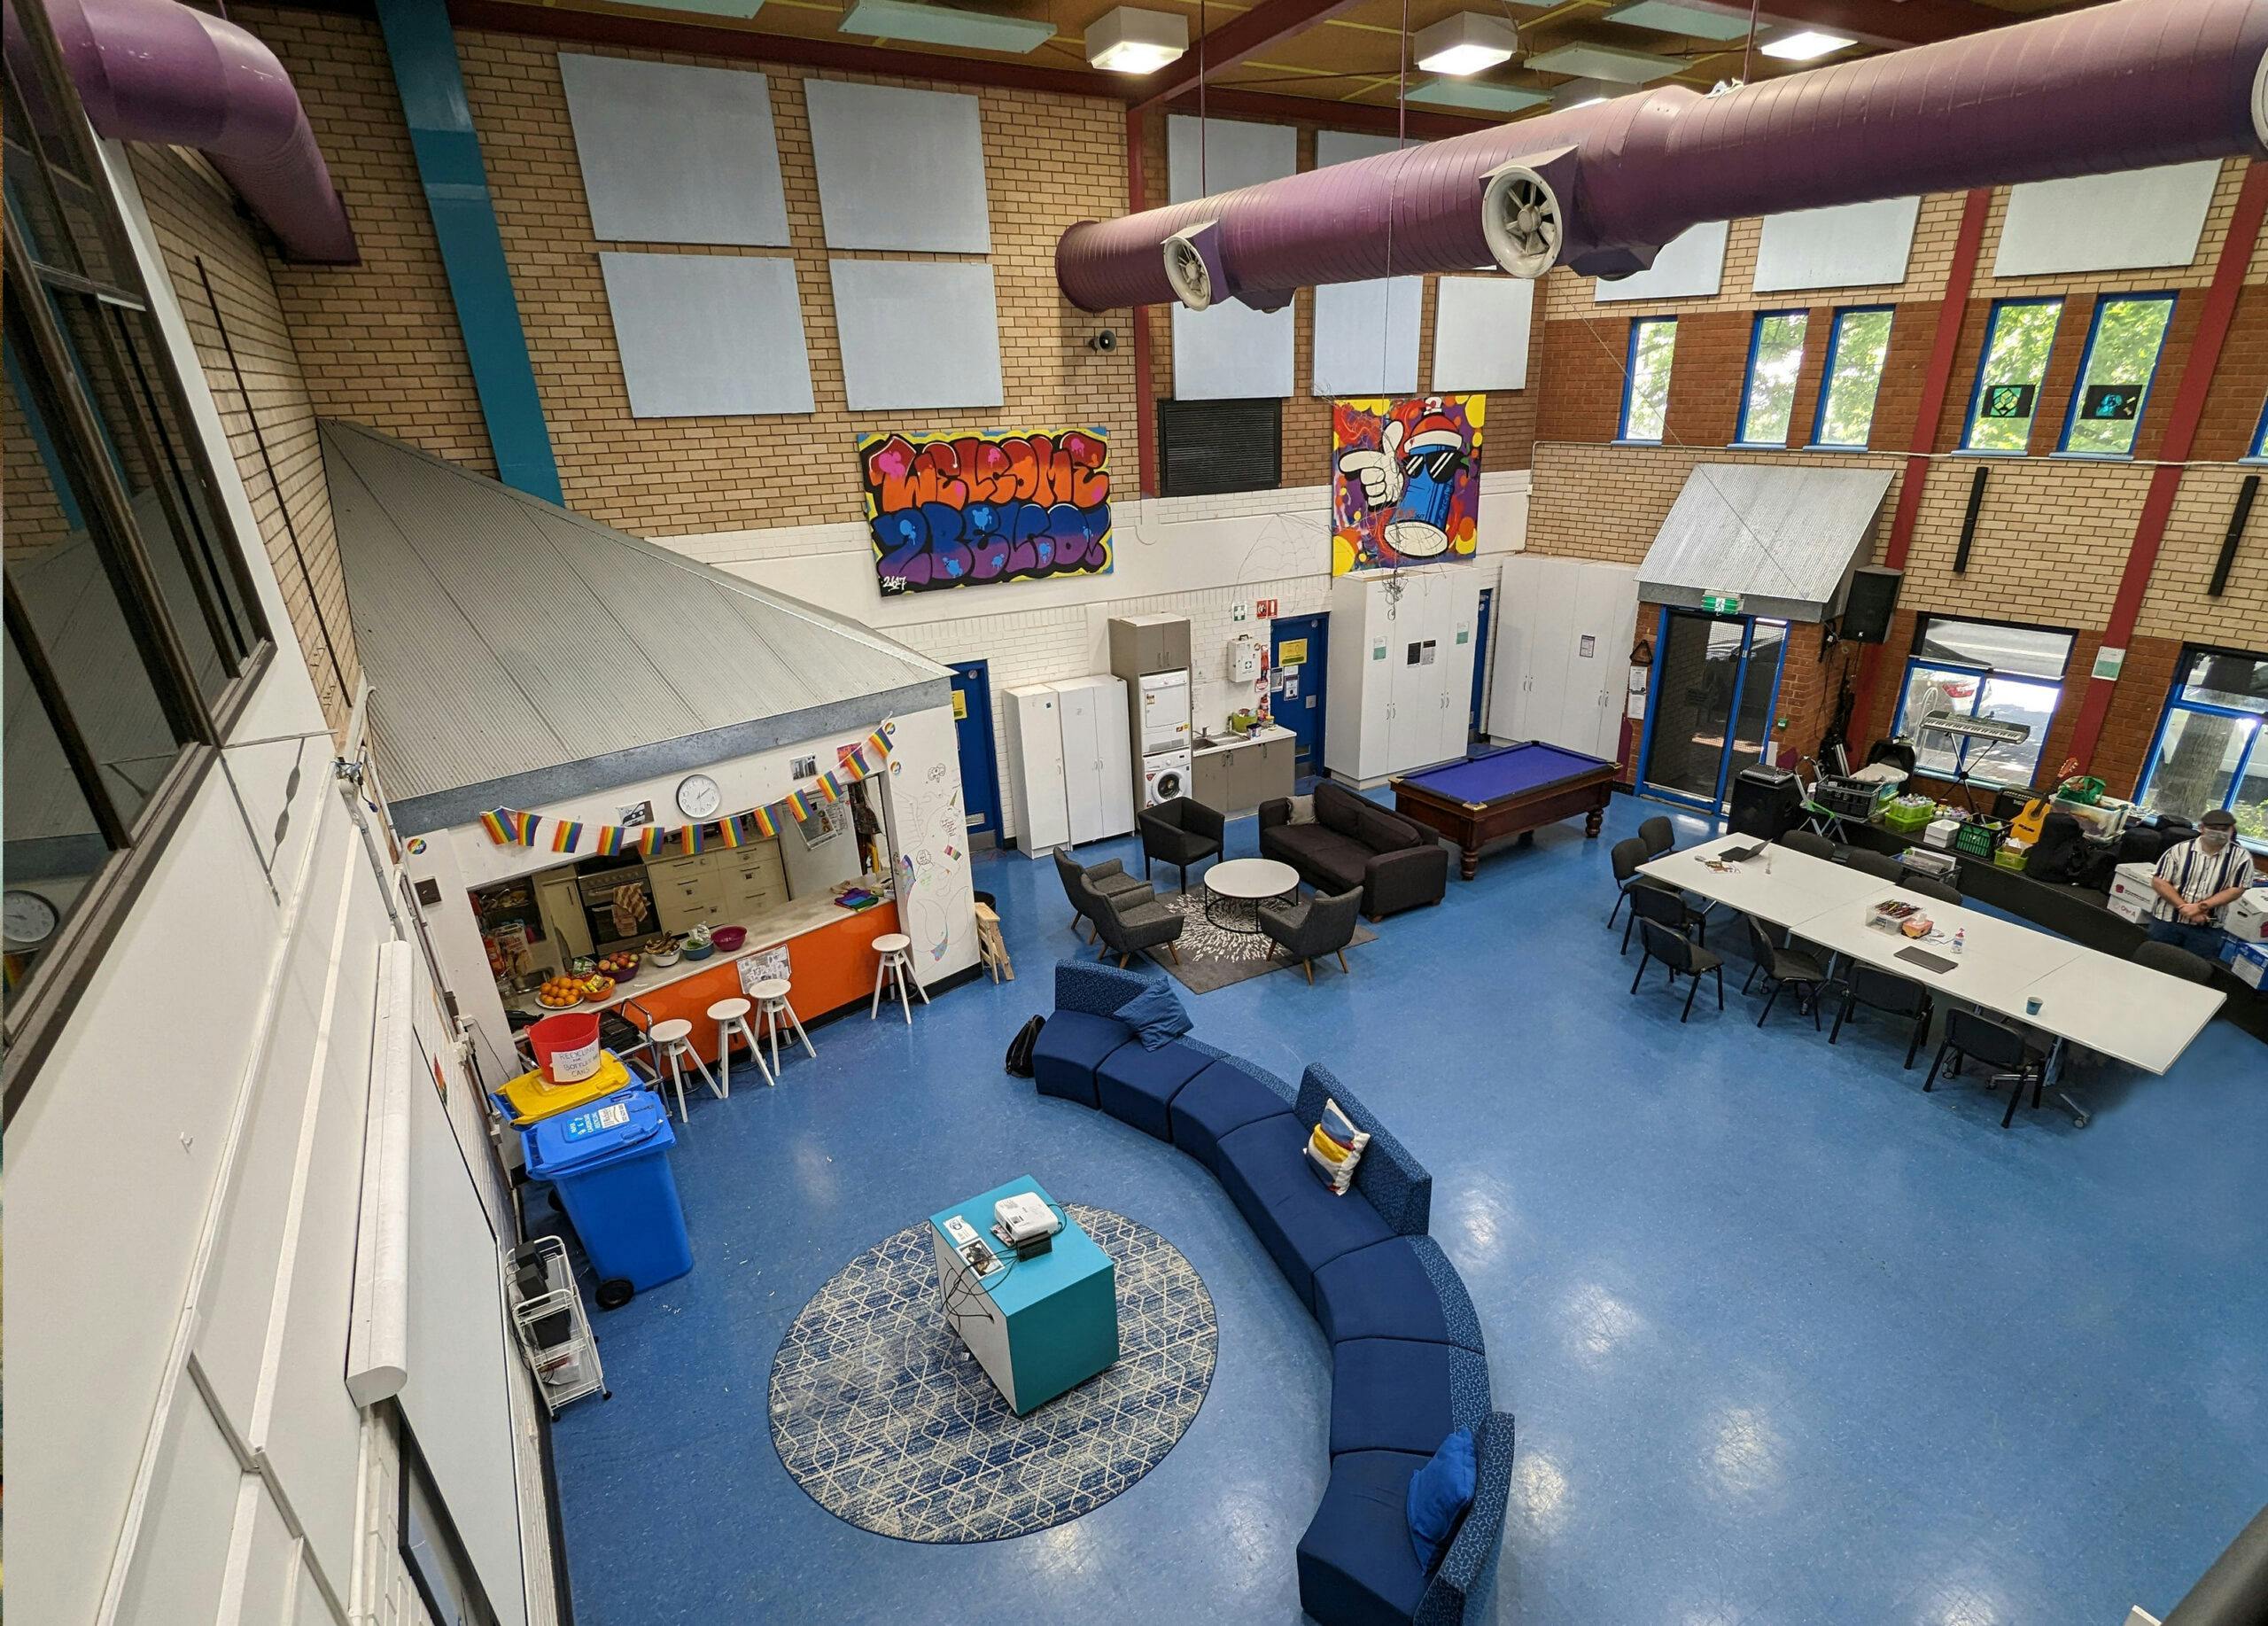 An aerial photograph inside the Belconnen Youth Centre